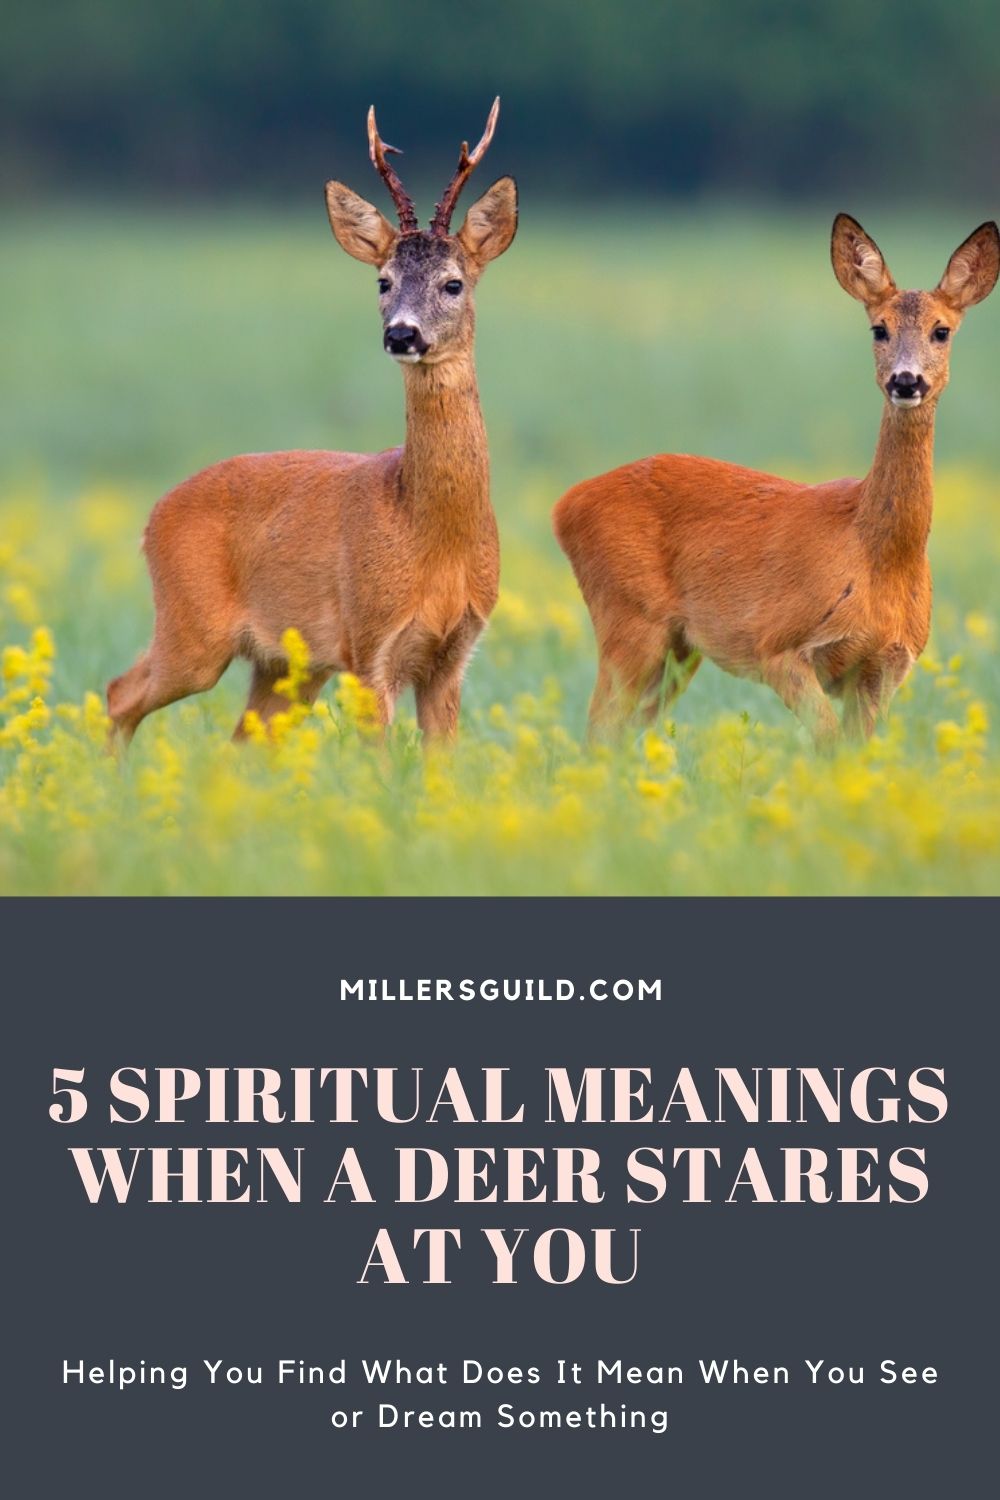 5 Spiritual Meanings When a Deer Stares at You 2